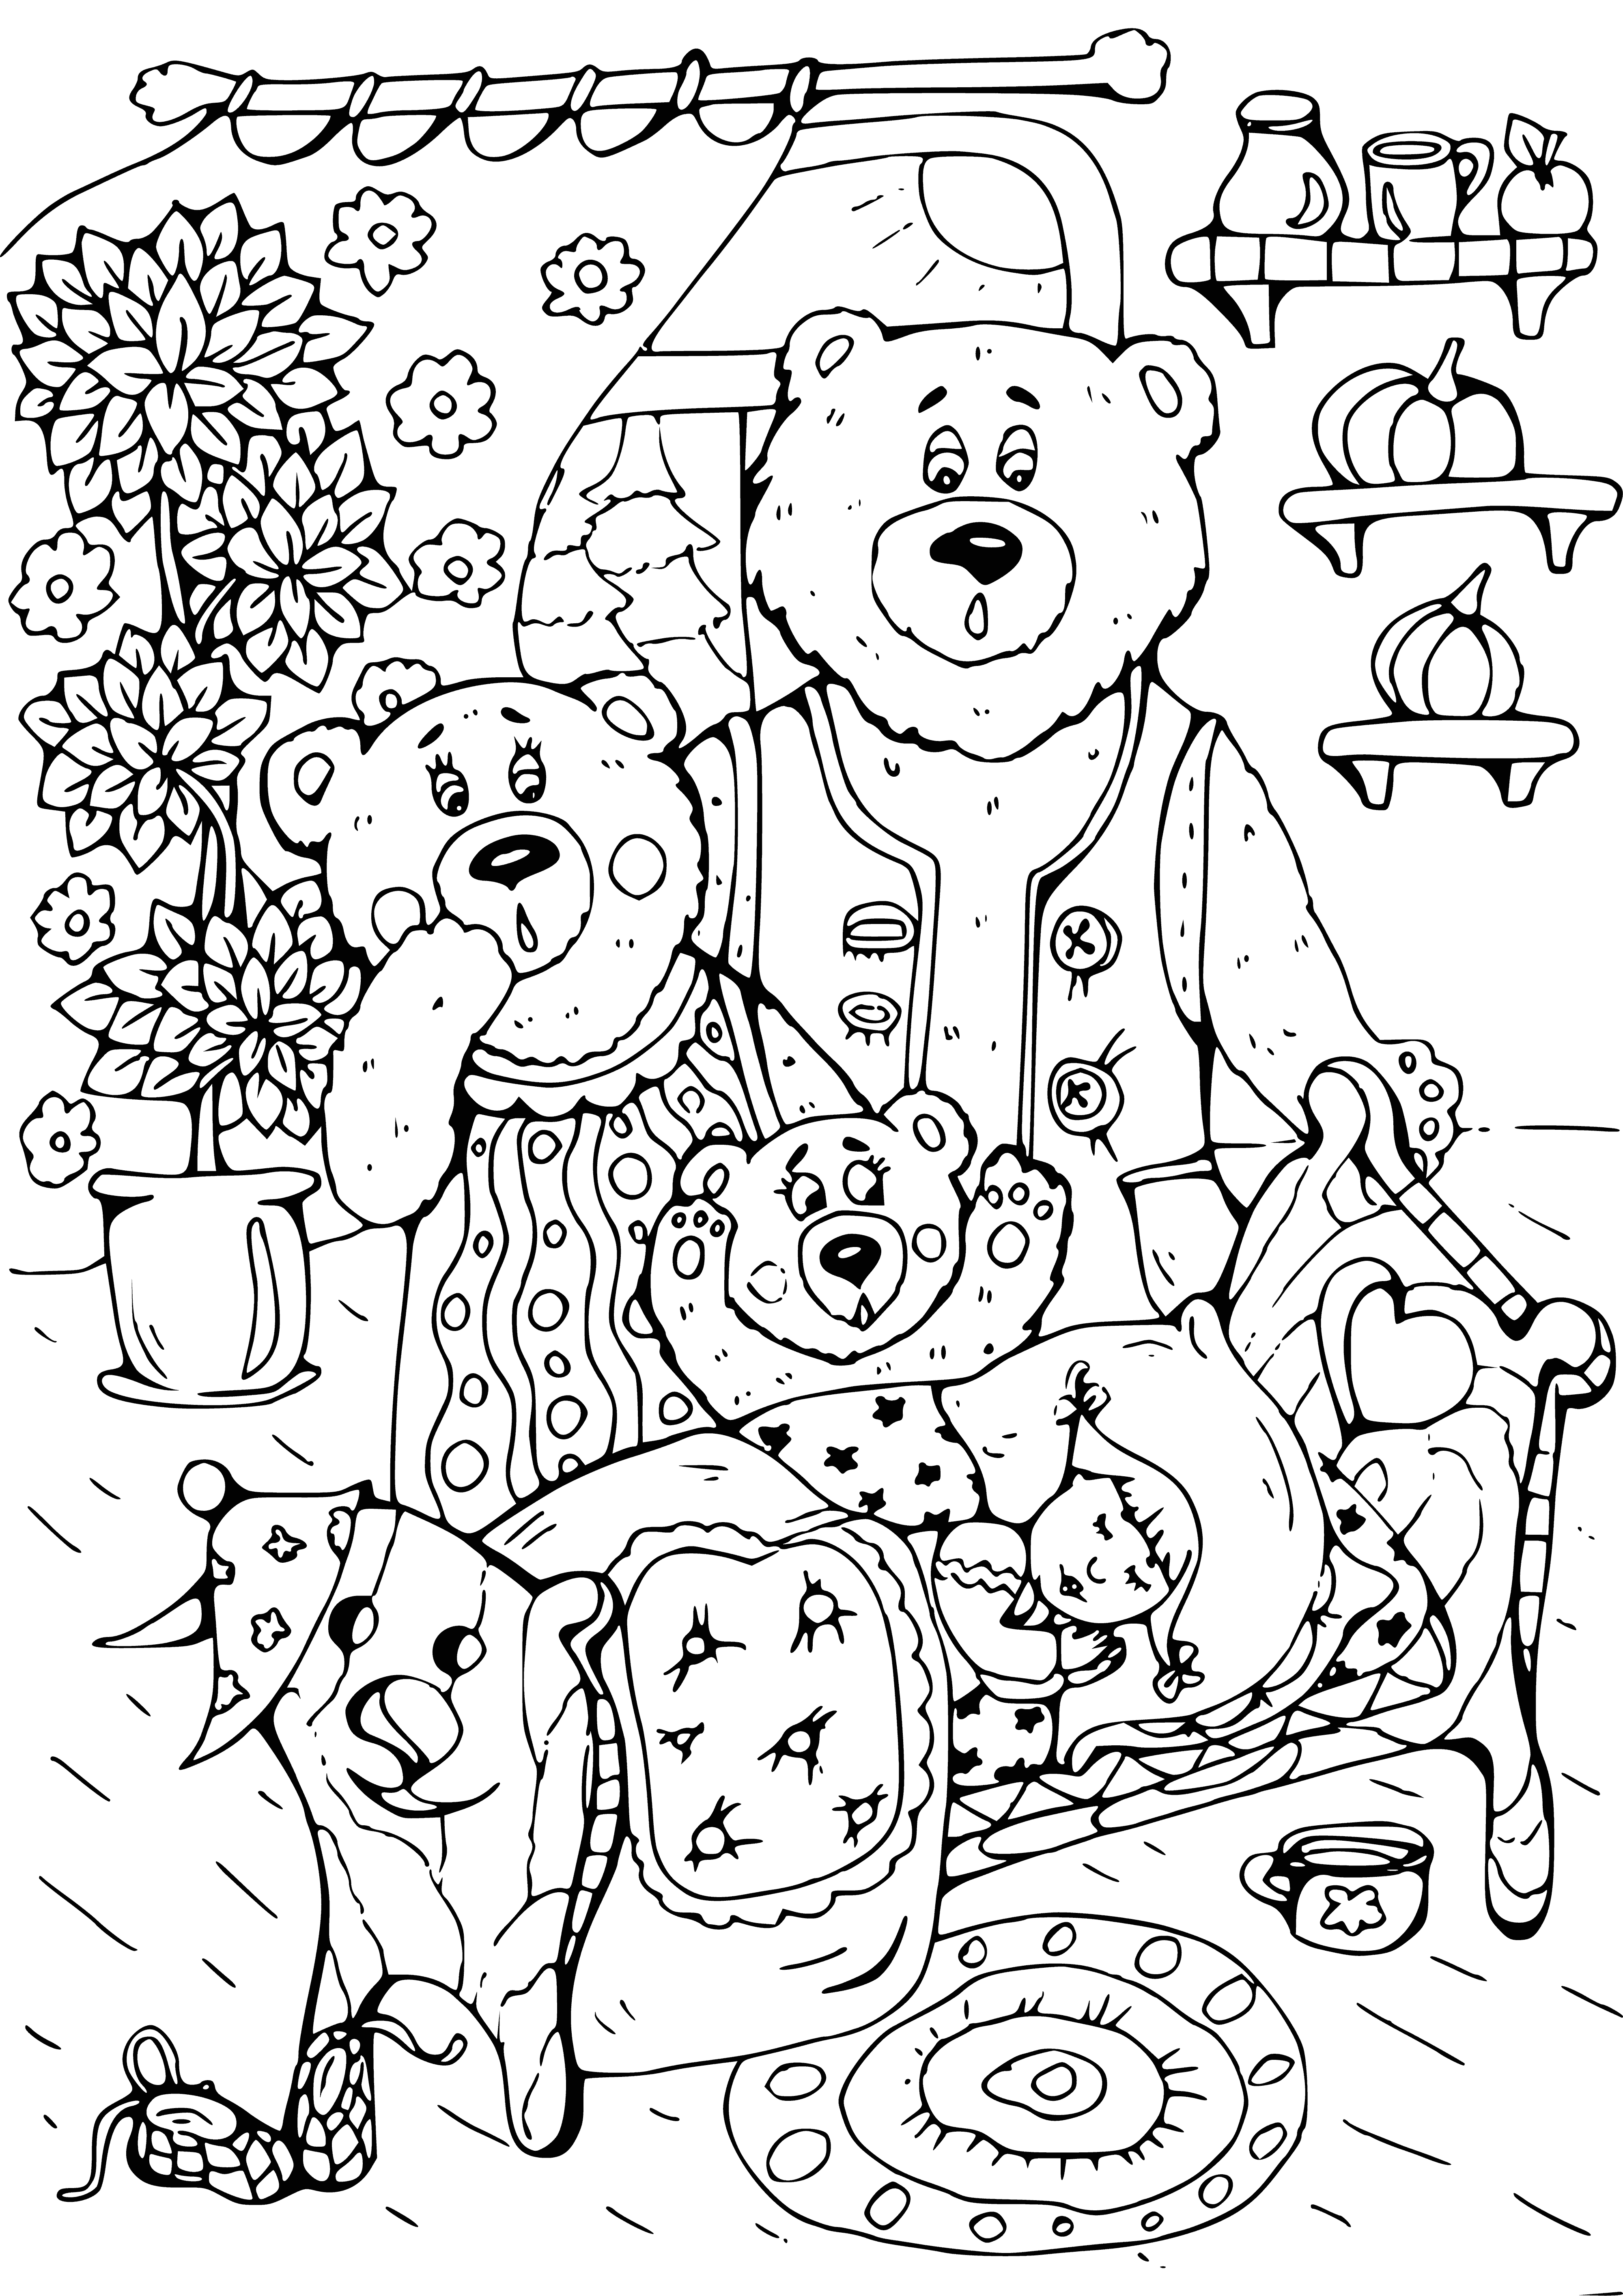 coloring page: A woman gives birth to a baby and is so happy she sings & dances, but her husband is angry she took their daughter away. #russiantale